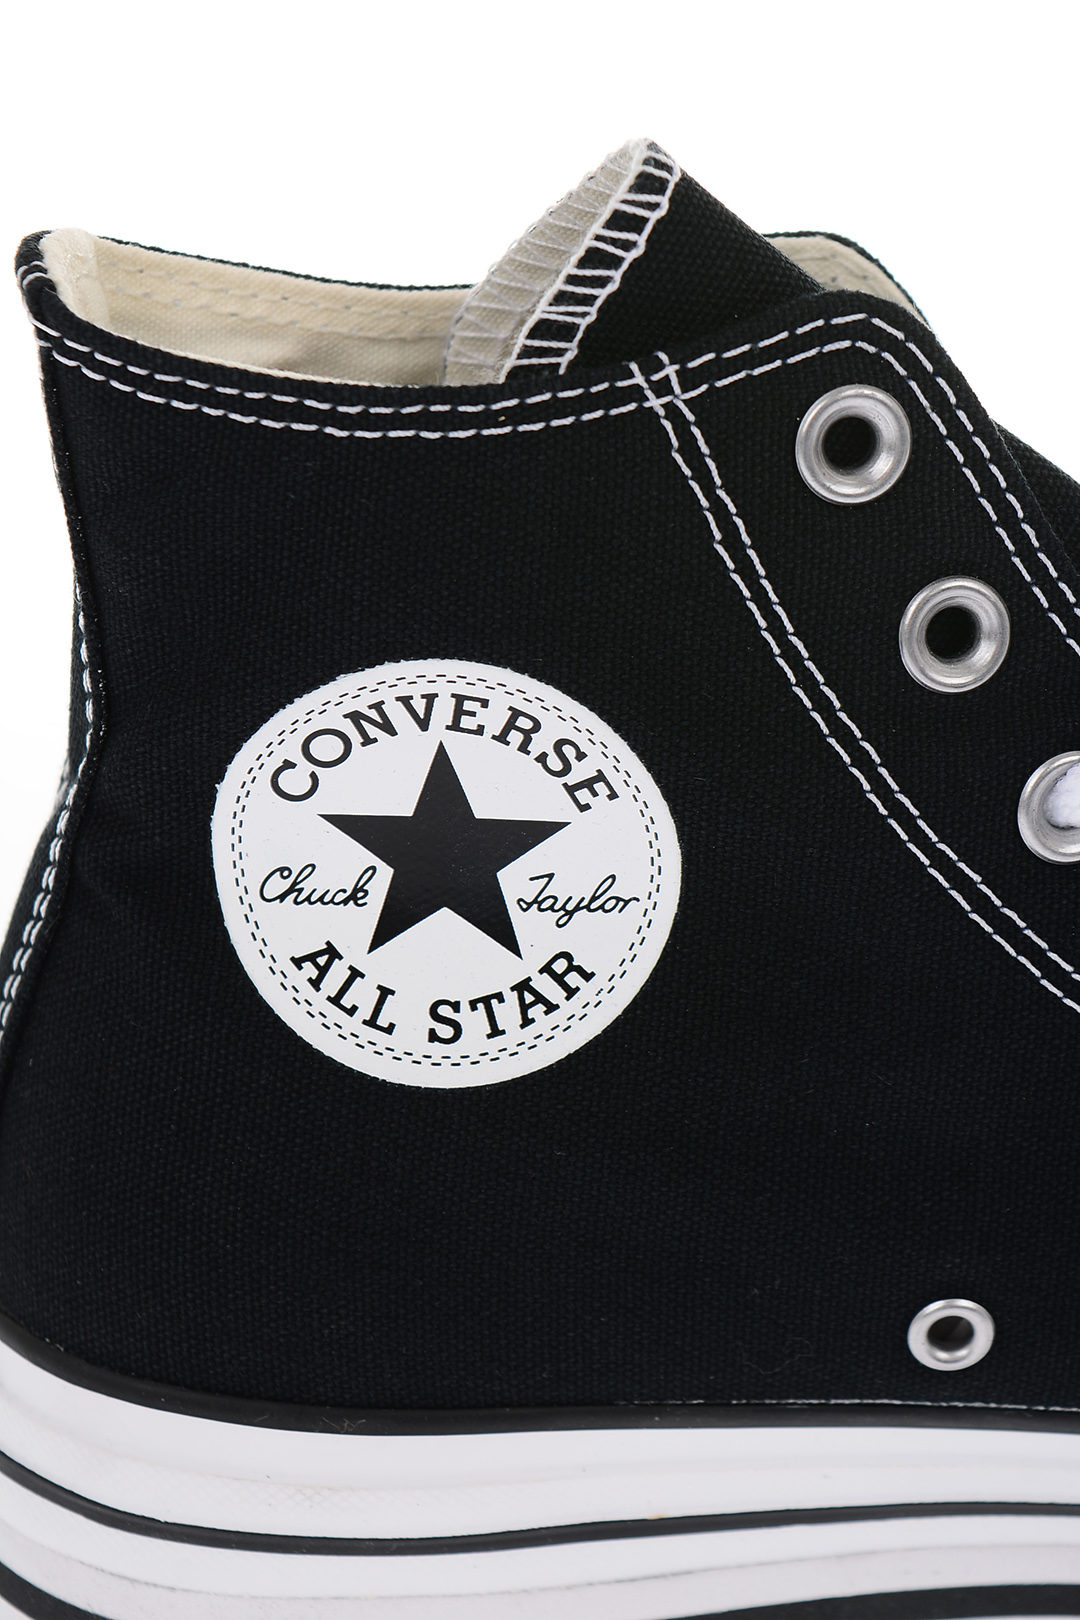 Converse ALL STAR Studded Platform High-Top Sneakers women - Glamood Outlet